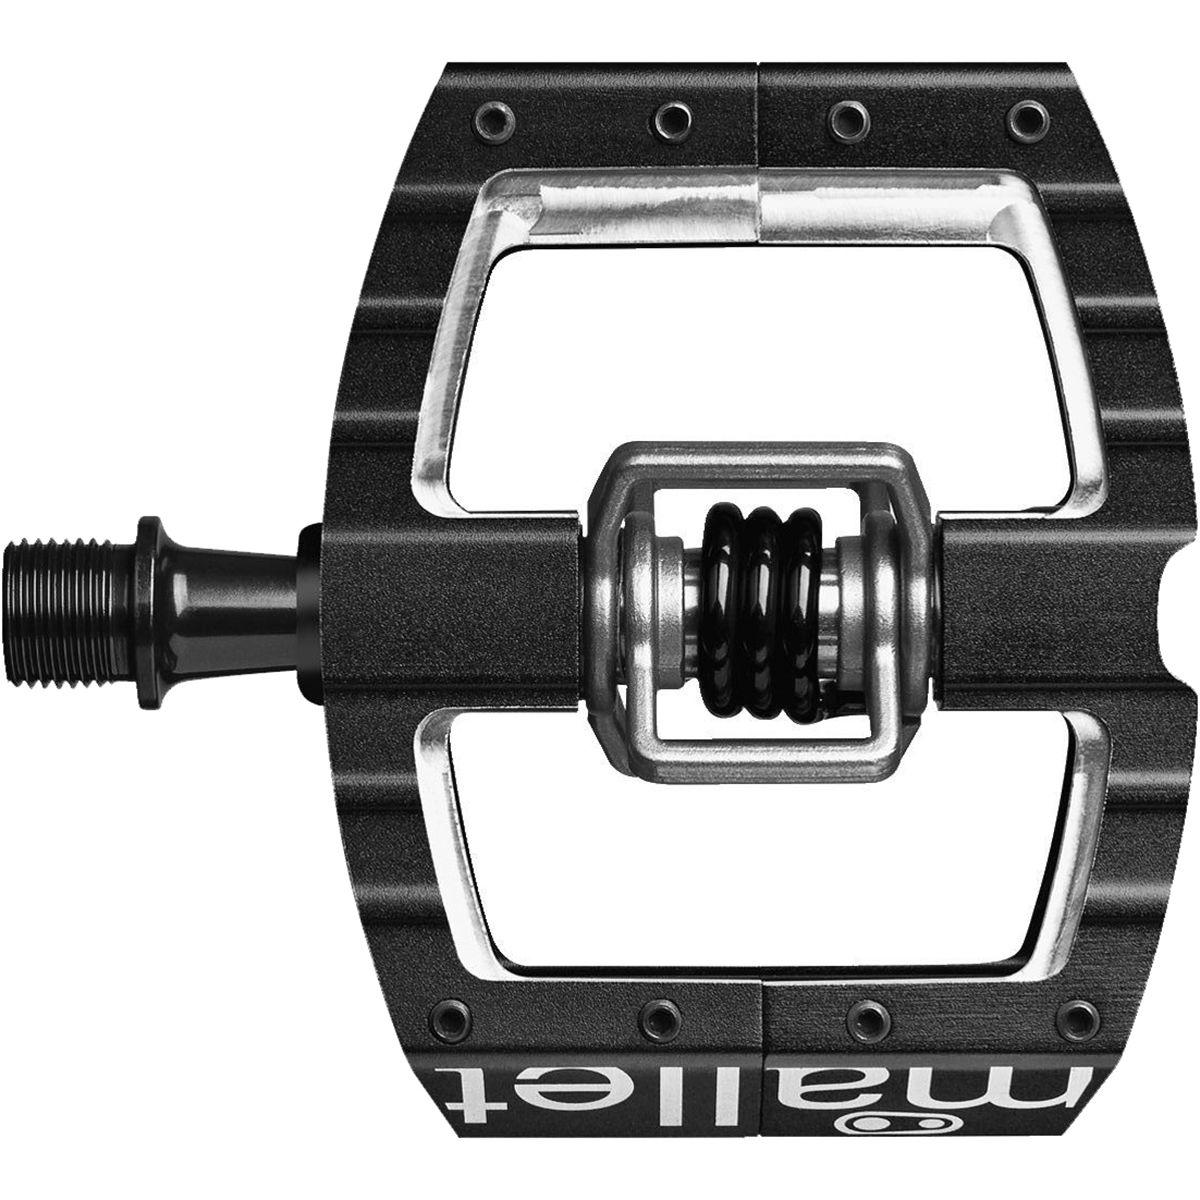 Crank Brothers Mallet DH Race Pedals - Bike